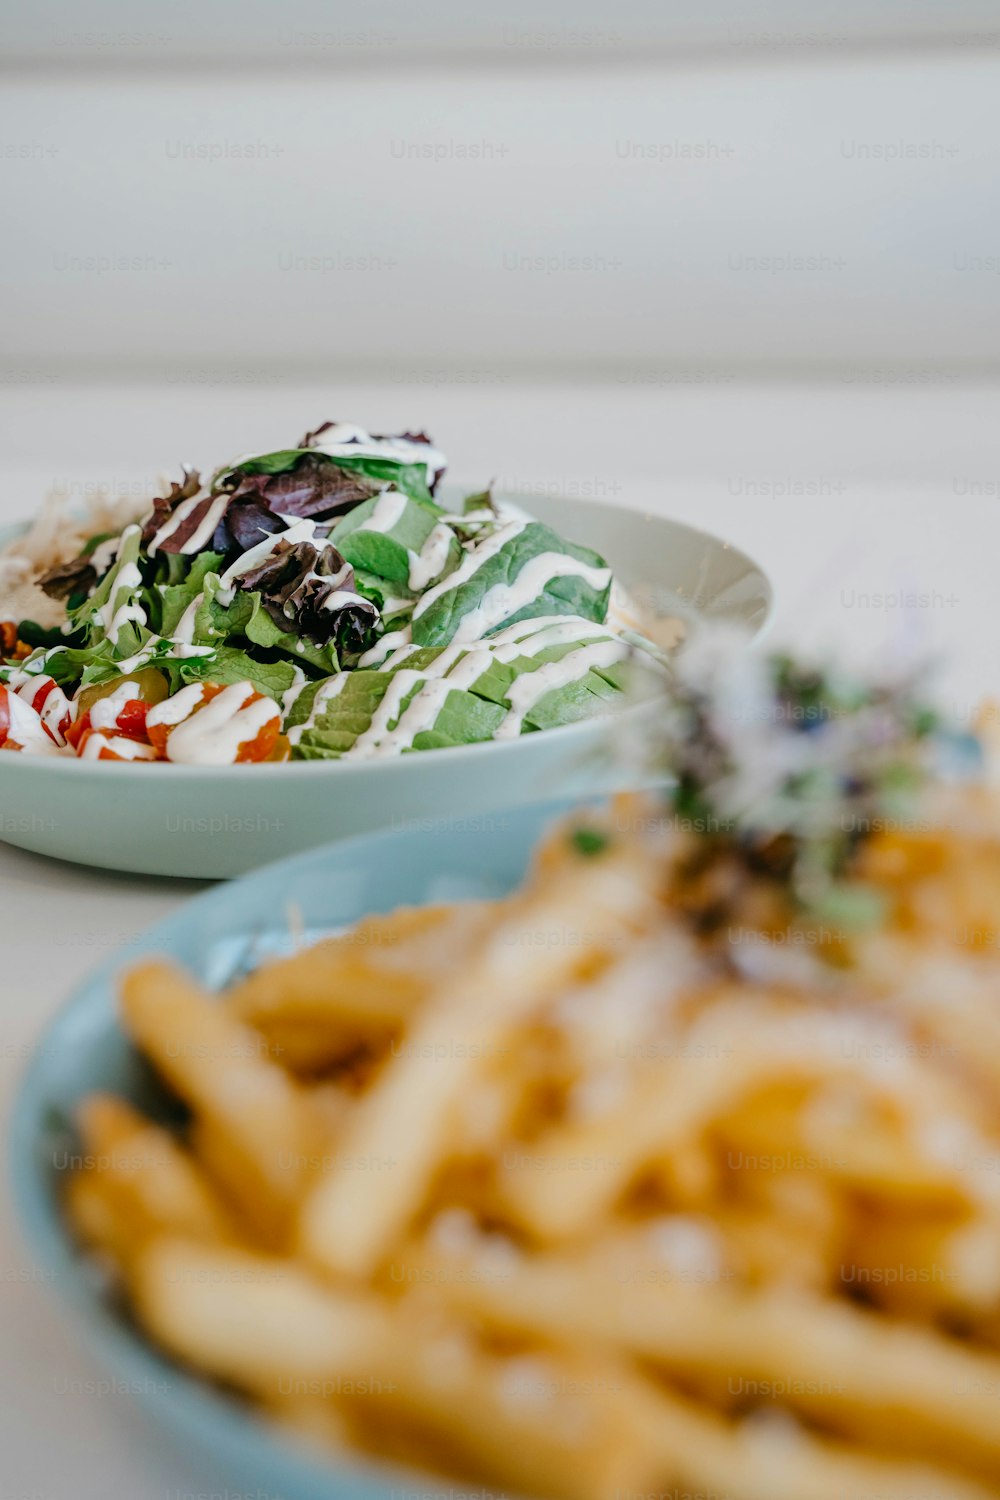 a plate of fries and a bowl of salad